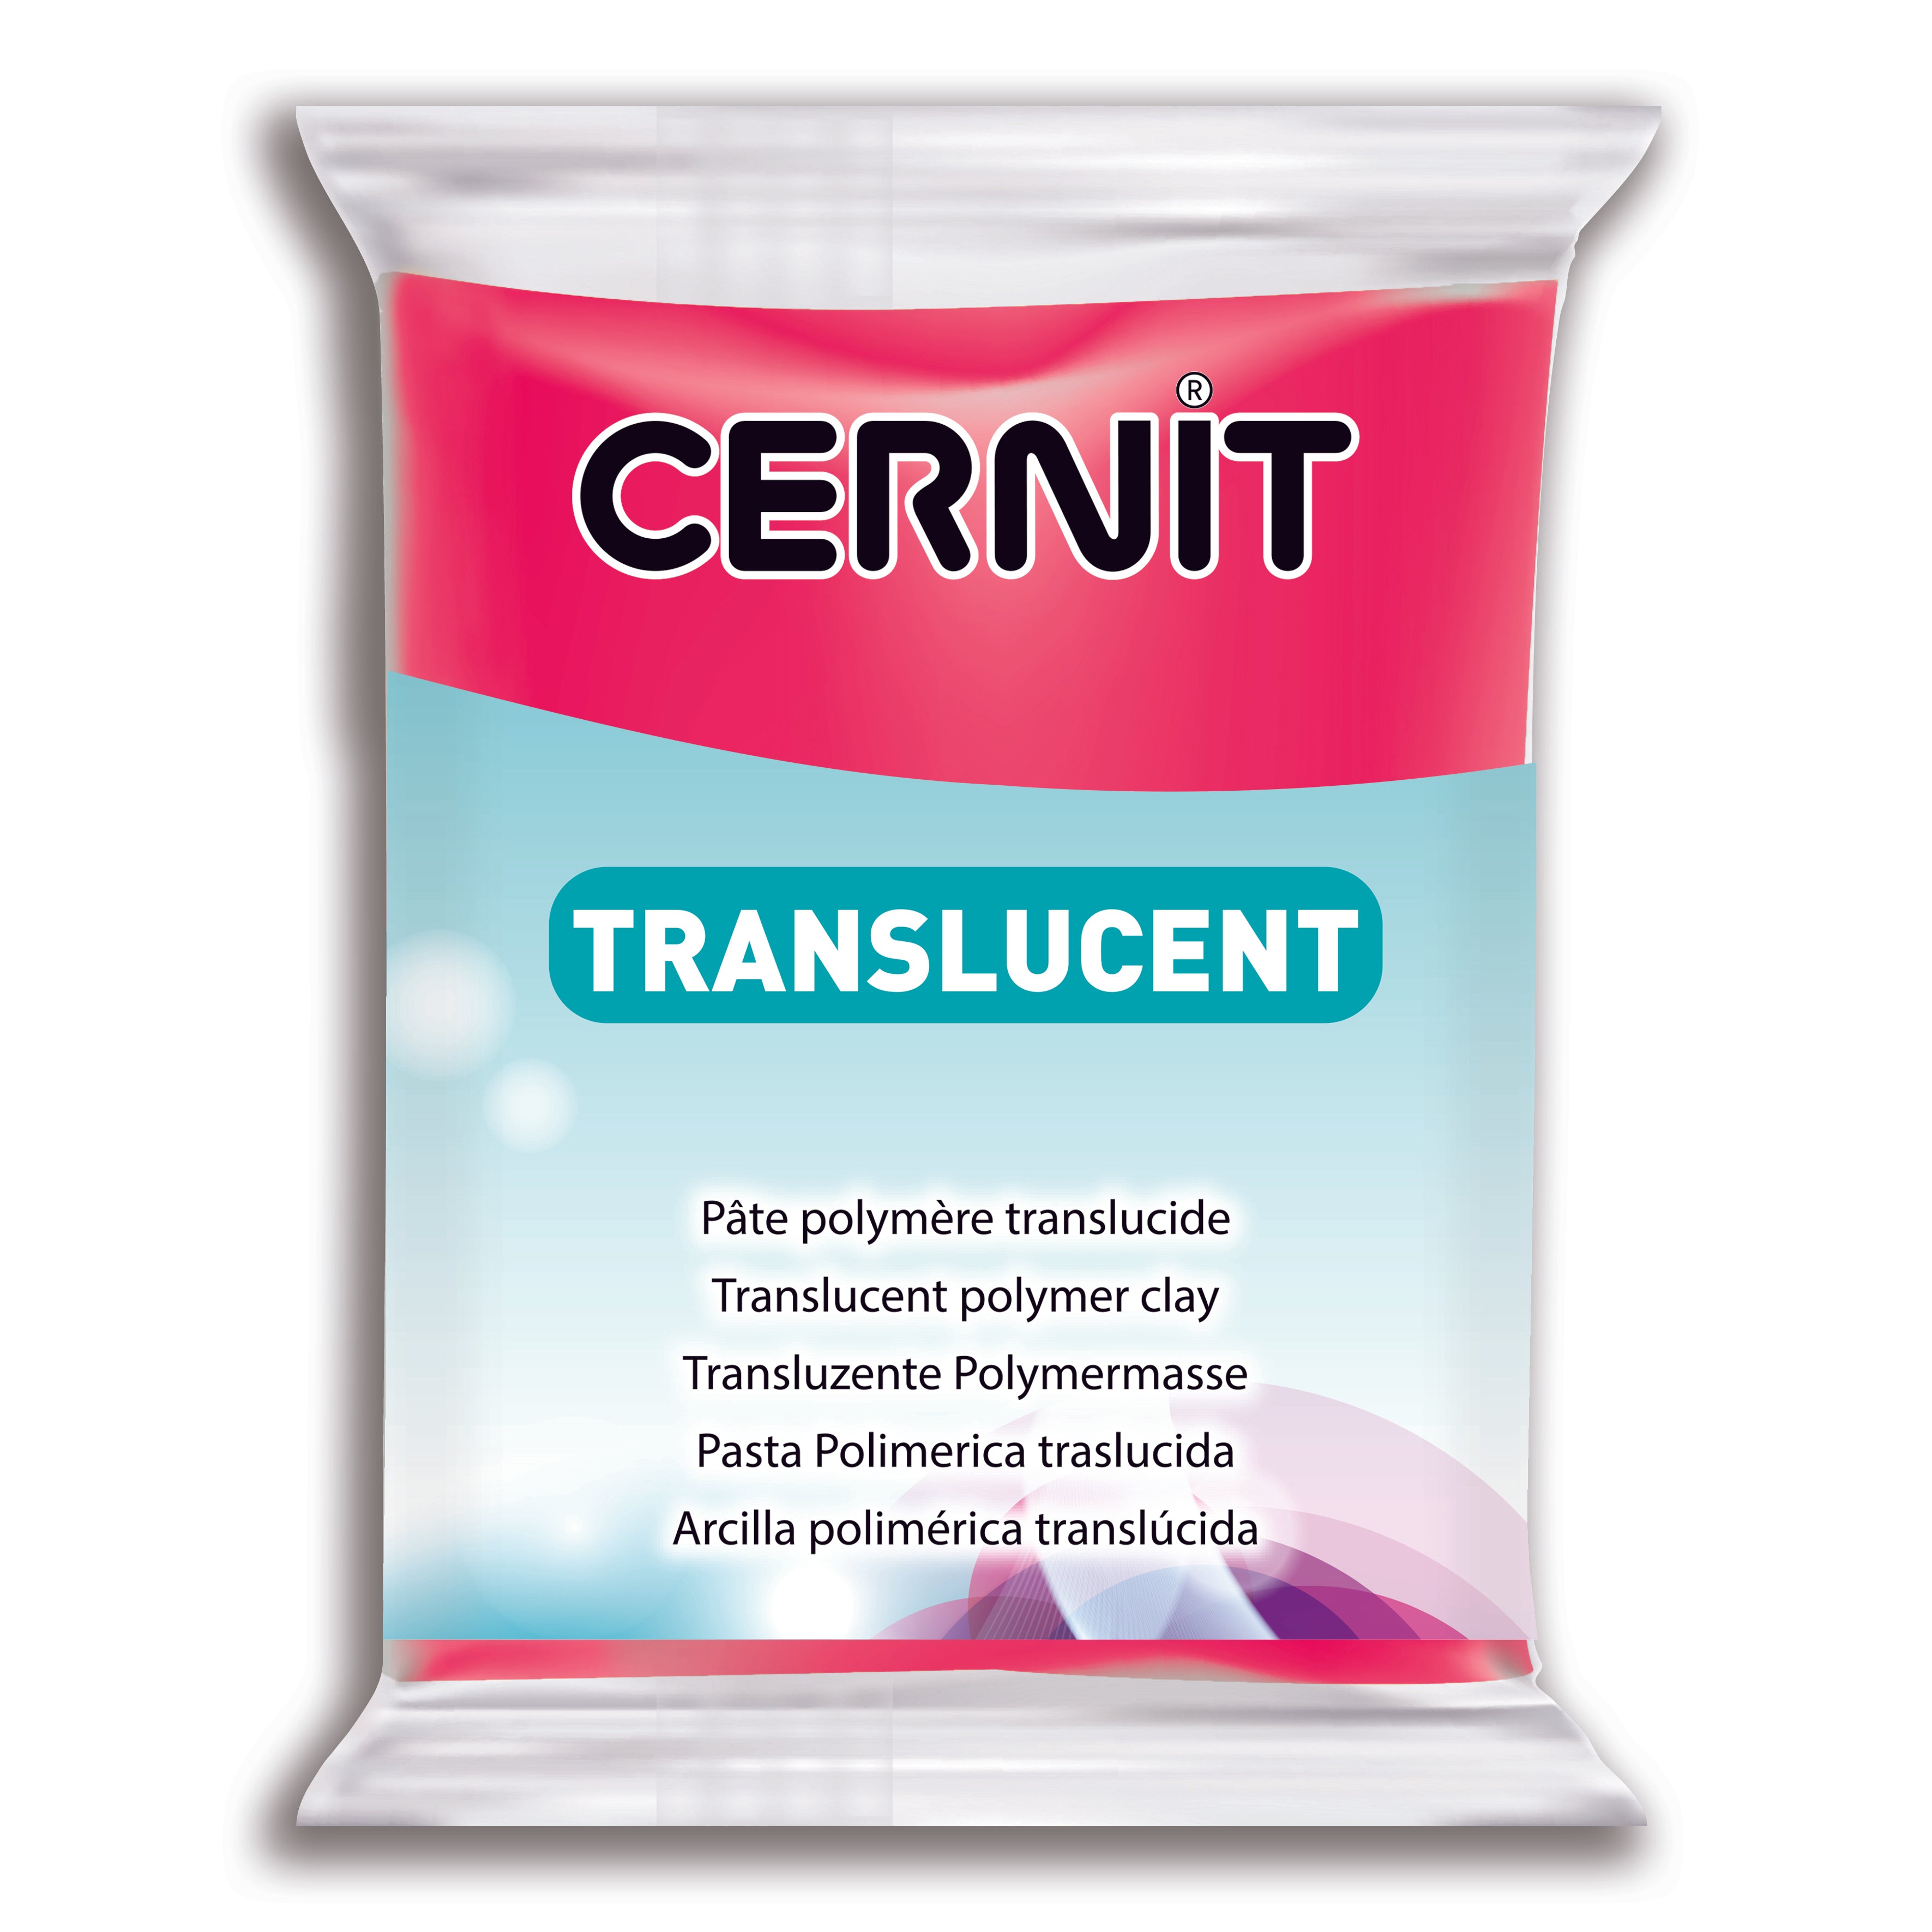 Cernit® Number One Opaque White Polymer Clay, 2oz.